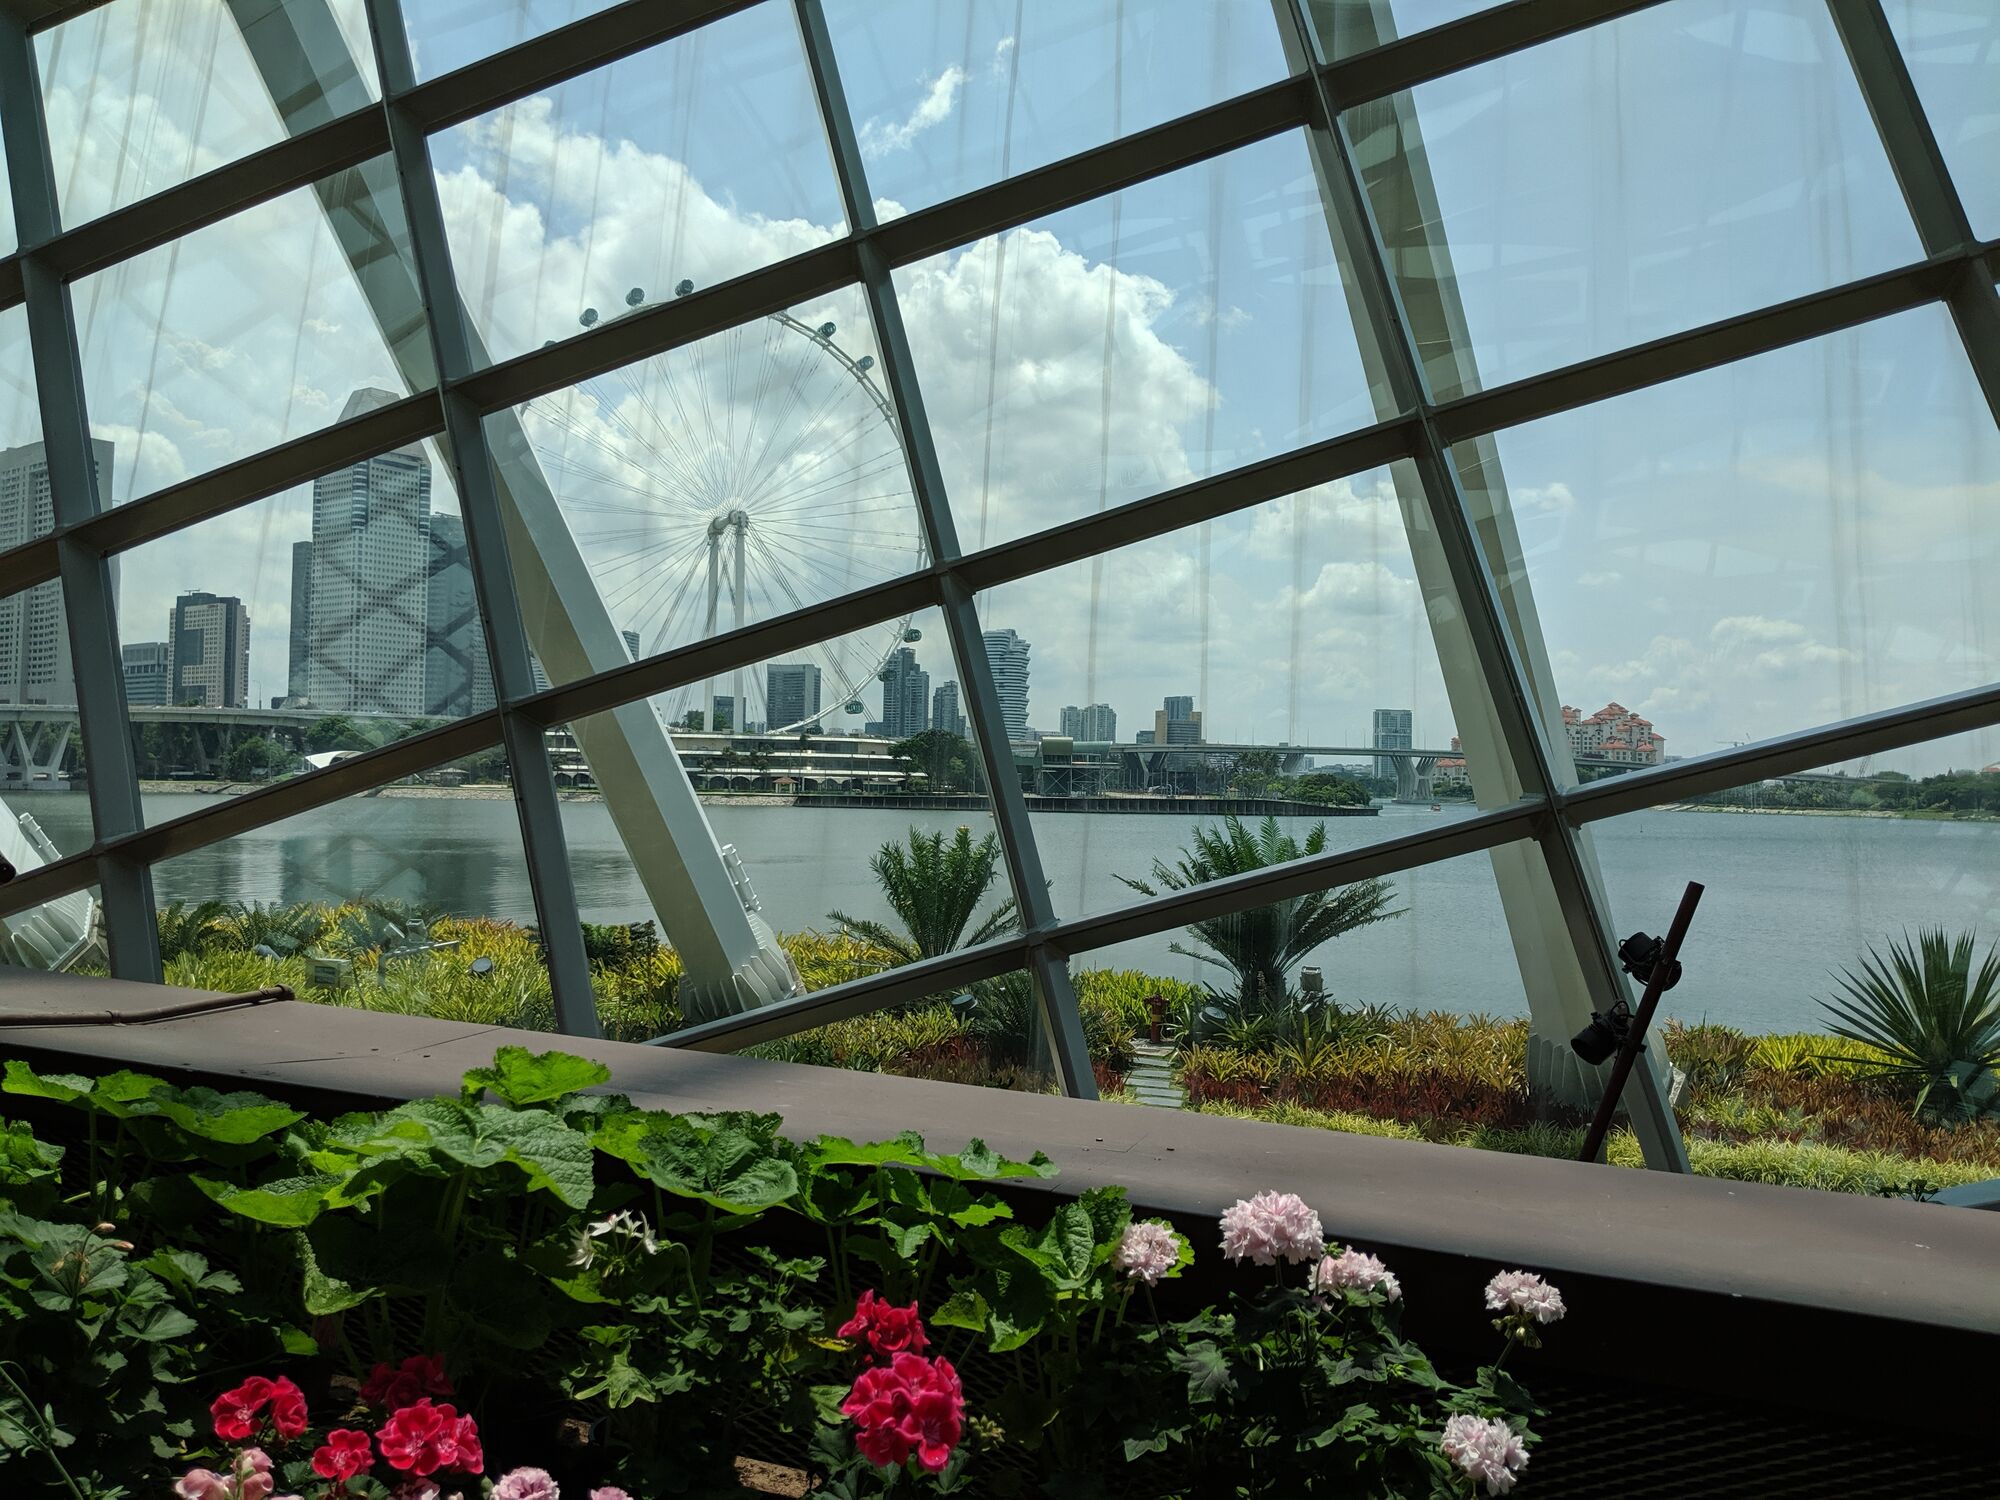 View of the Singapore Flyer